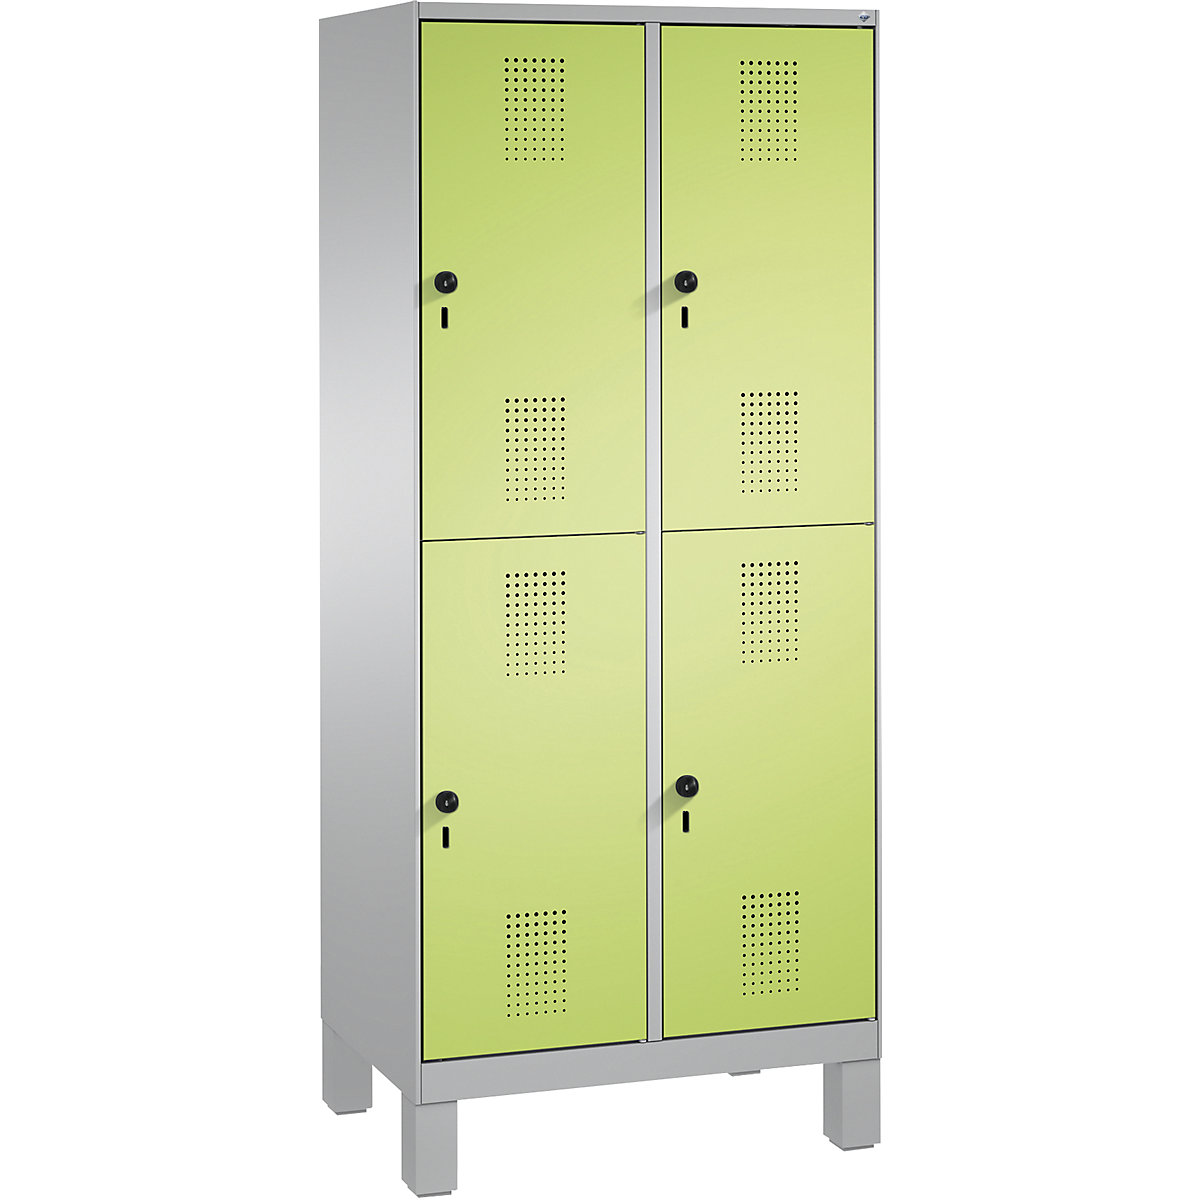 EVOLO cloakroom locker, double tier, with feet – C+P, 2 compartments, 2 shelf compartments each, compartment width 400 mm, white aluminium / viridian green-15